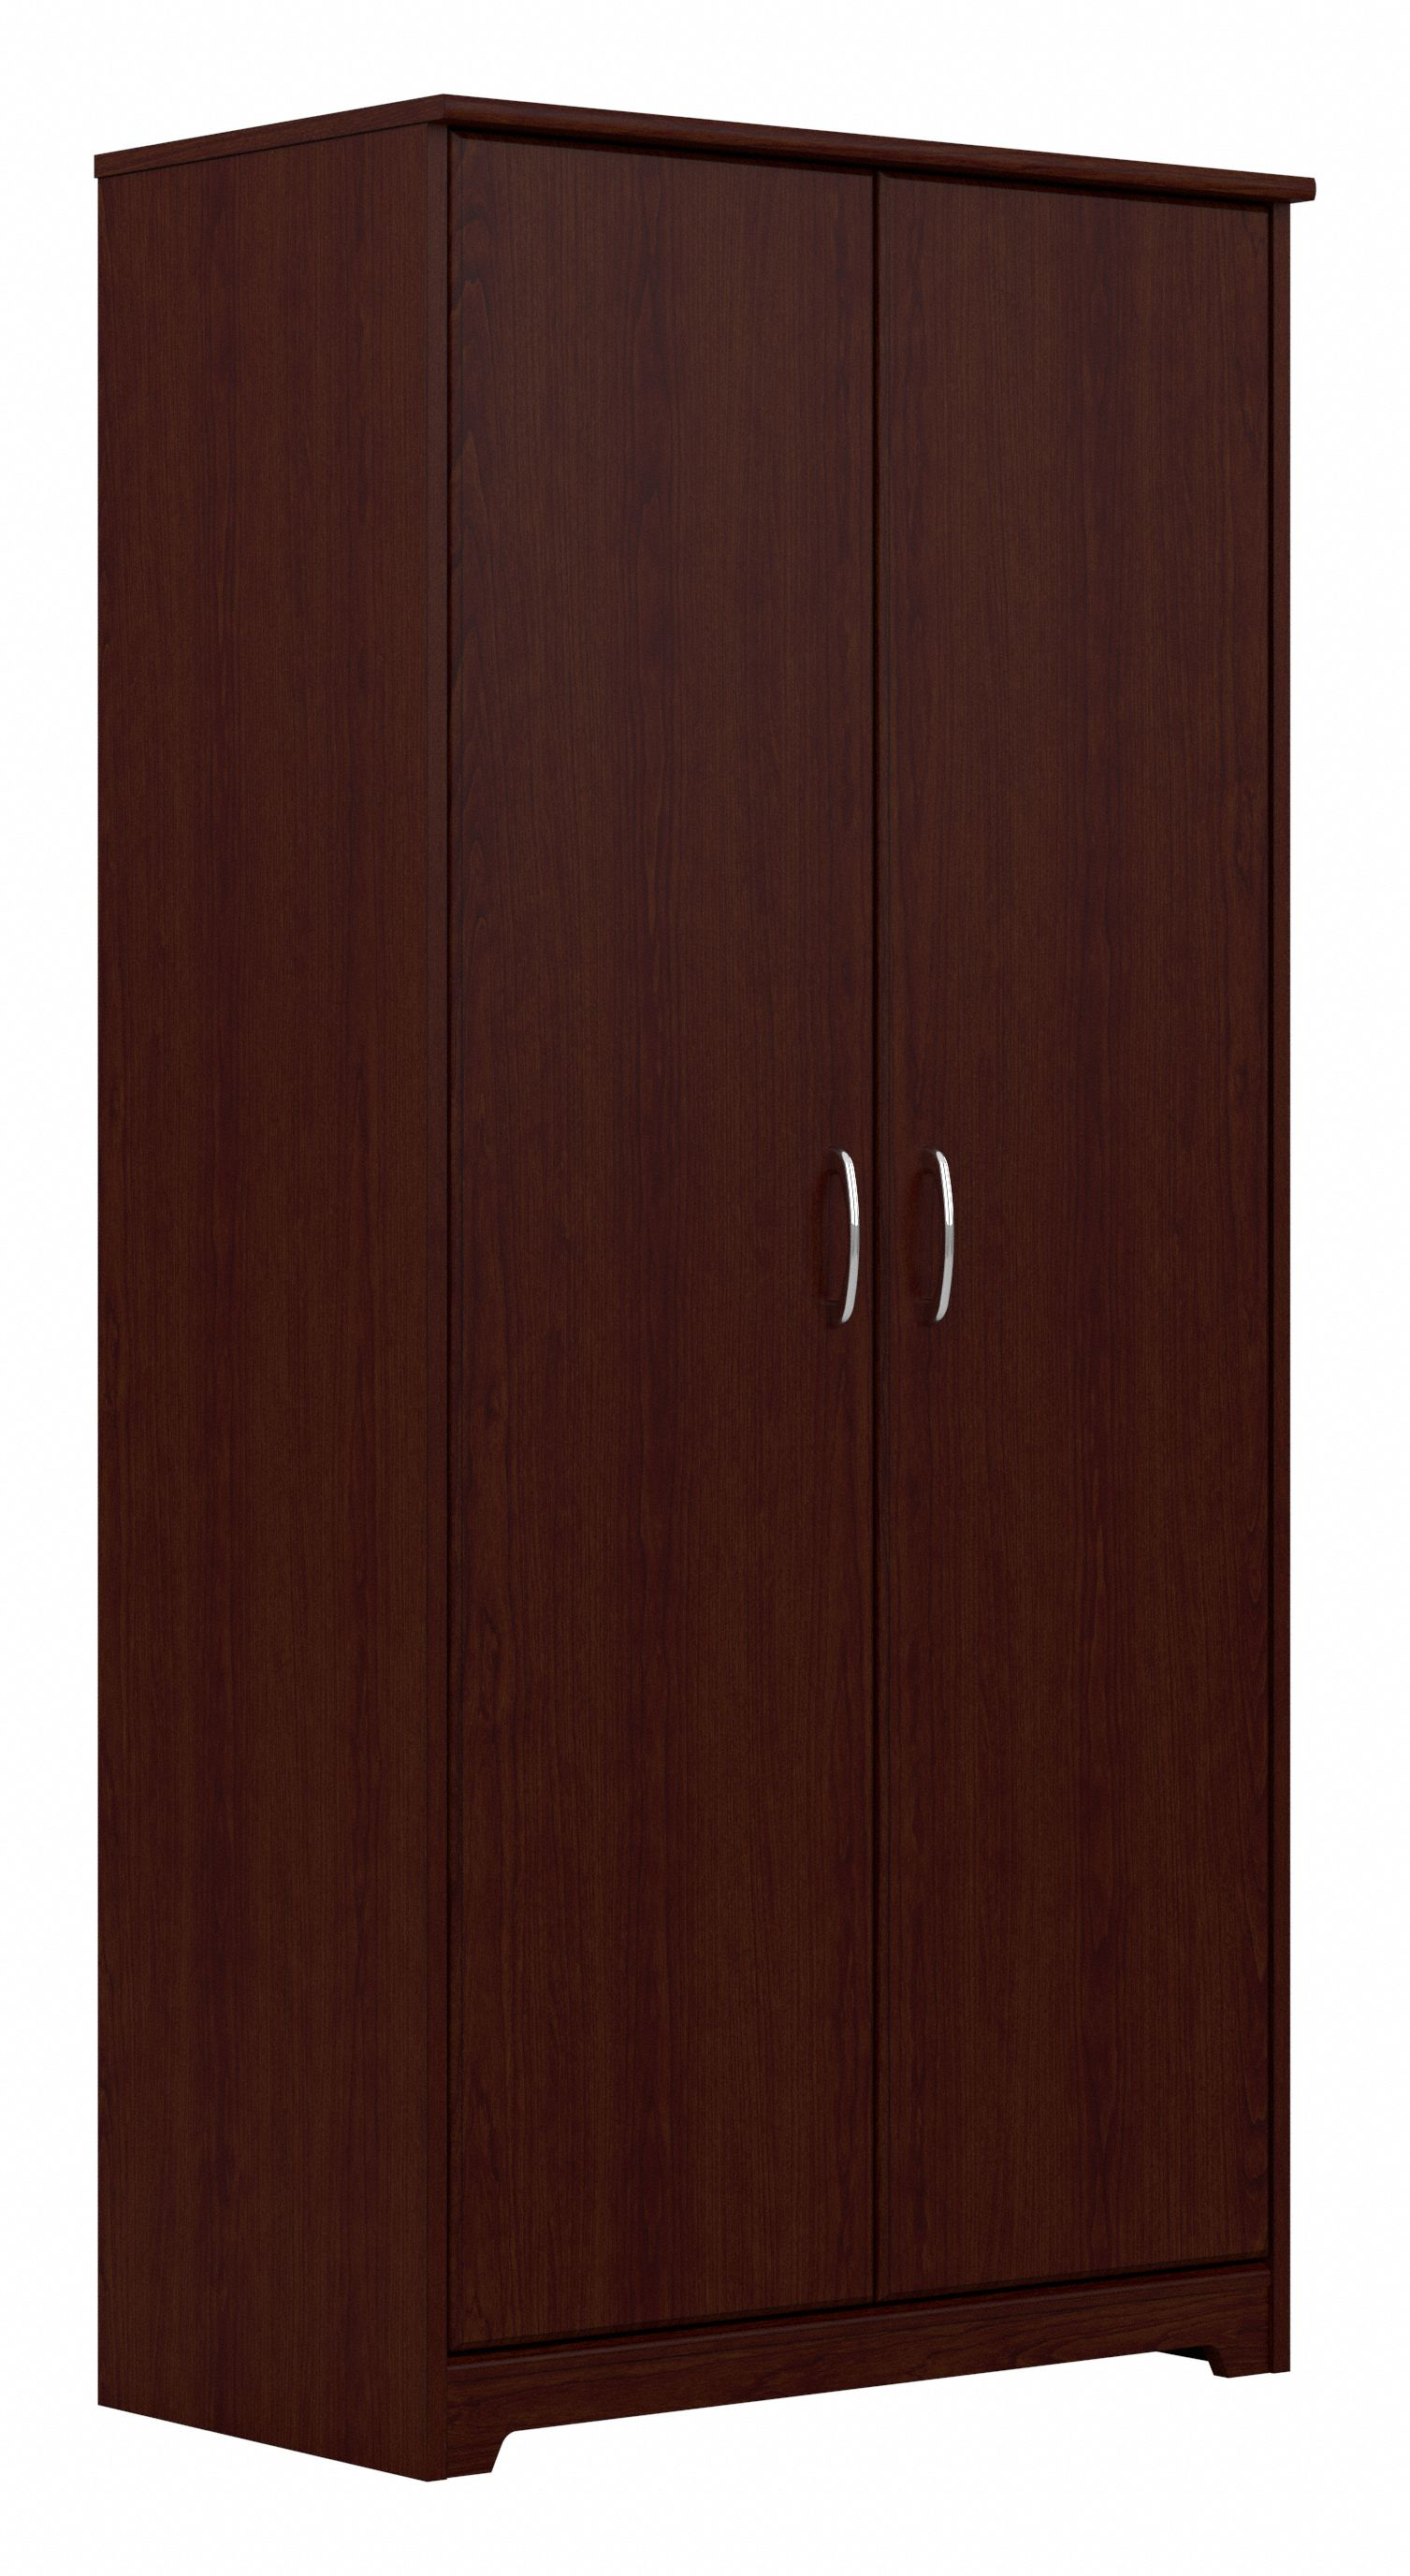 Shop Bush Furniture Cabot Tall Storage Cabinet with Doors 02 WC31499 #color_harvest cherry